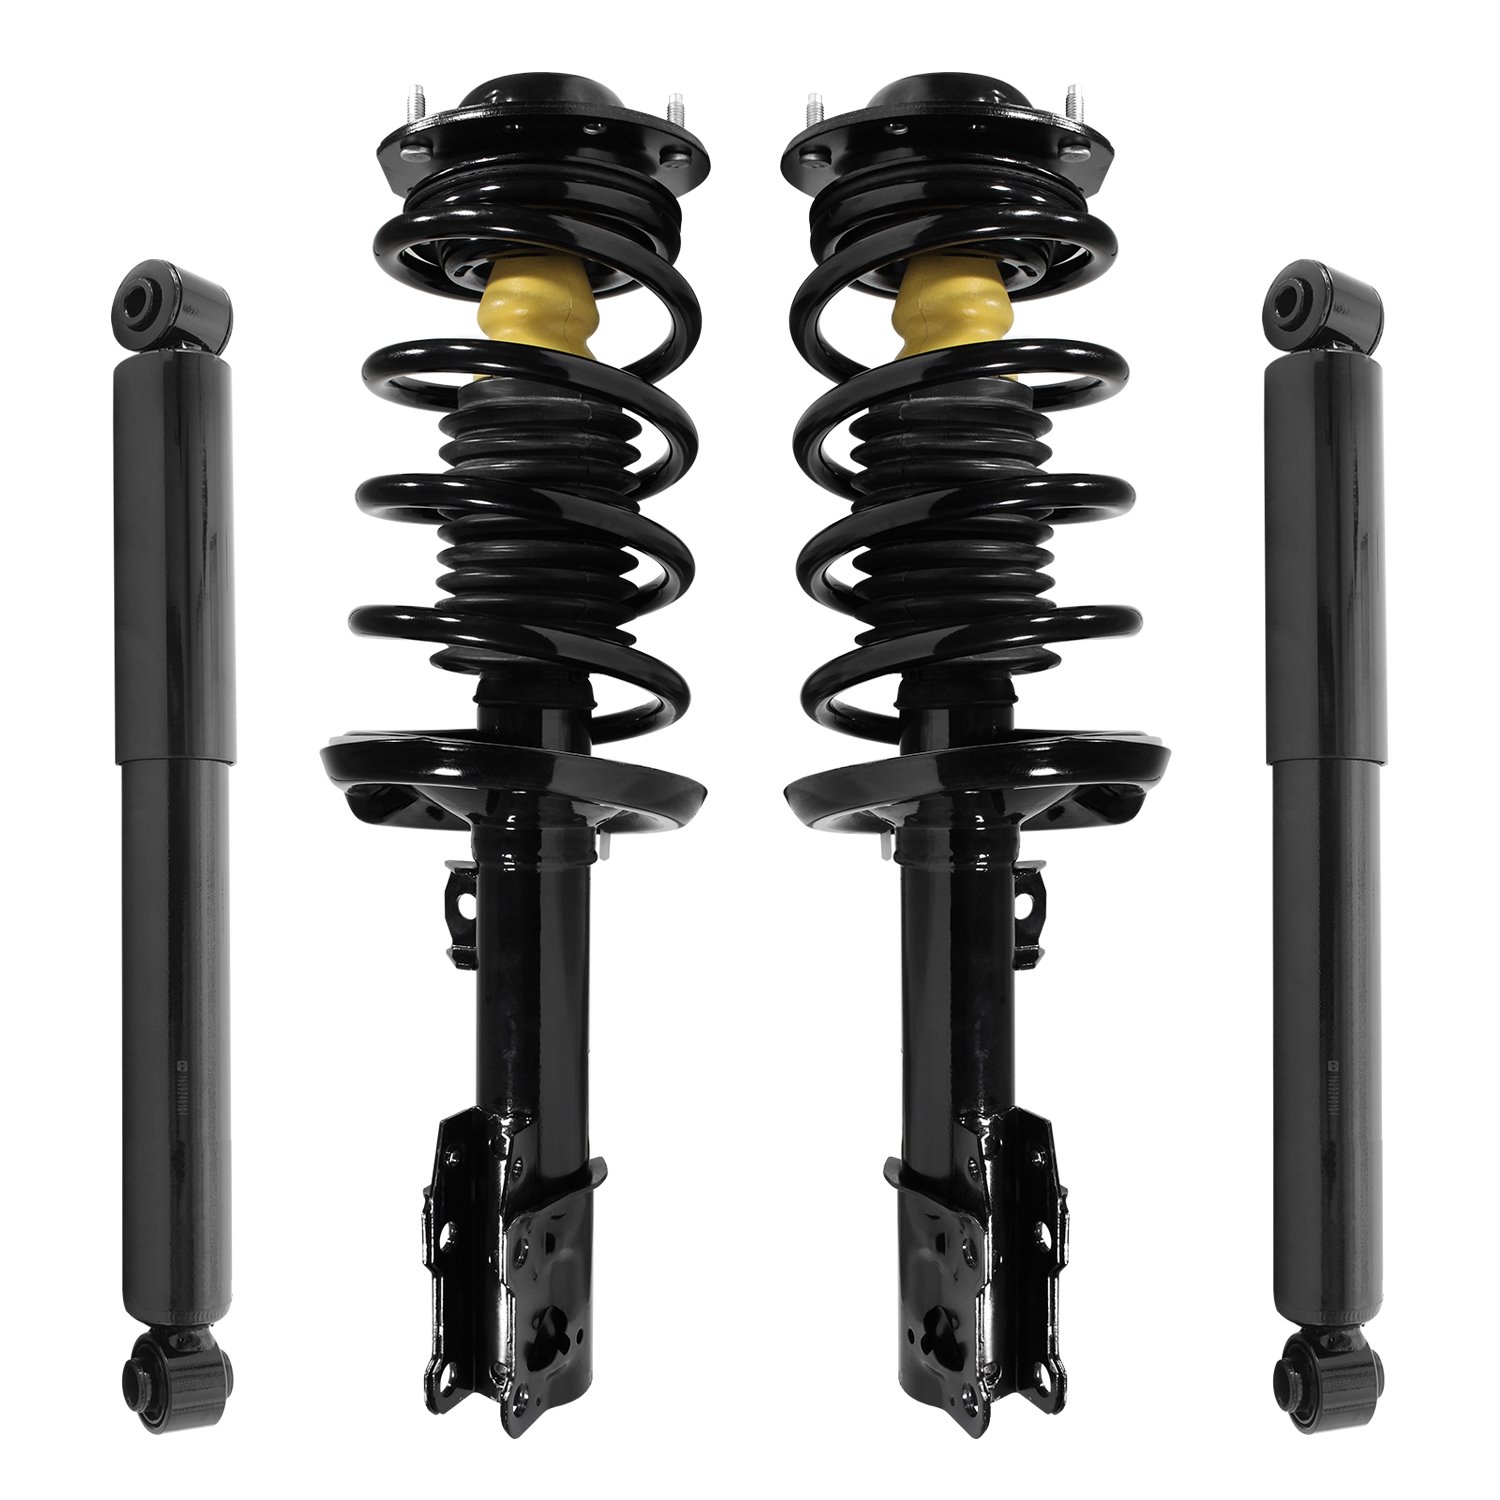 4-11671-251010-001 Front & Rear Suspension Strut & Coil Spring Assembly Fits Select Chevy Malibu